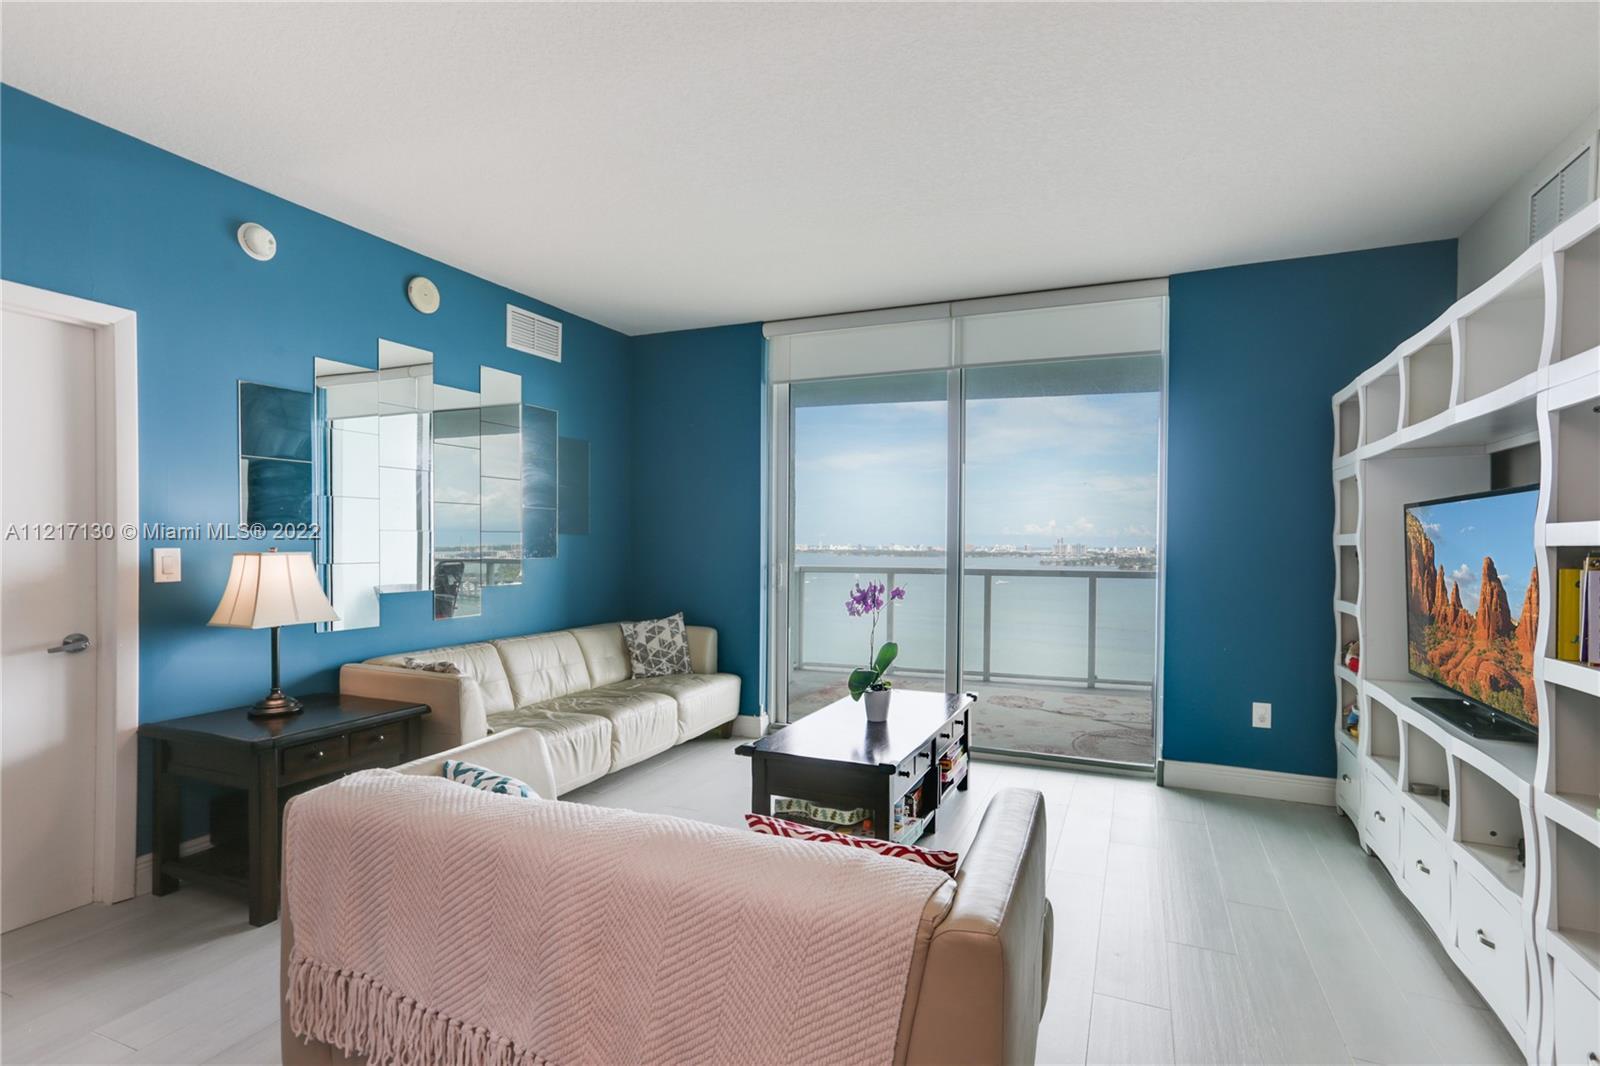 Let unobstructed Bay views brighten up your day in this 2 BD, 2.5 BA + den home. Expansive water vie